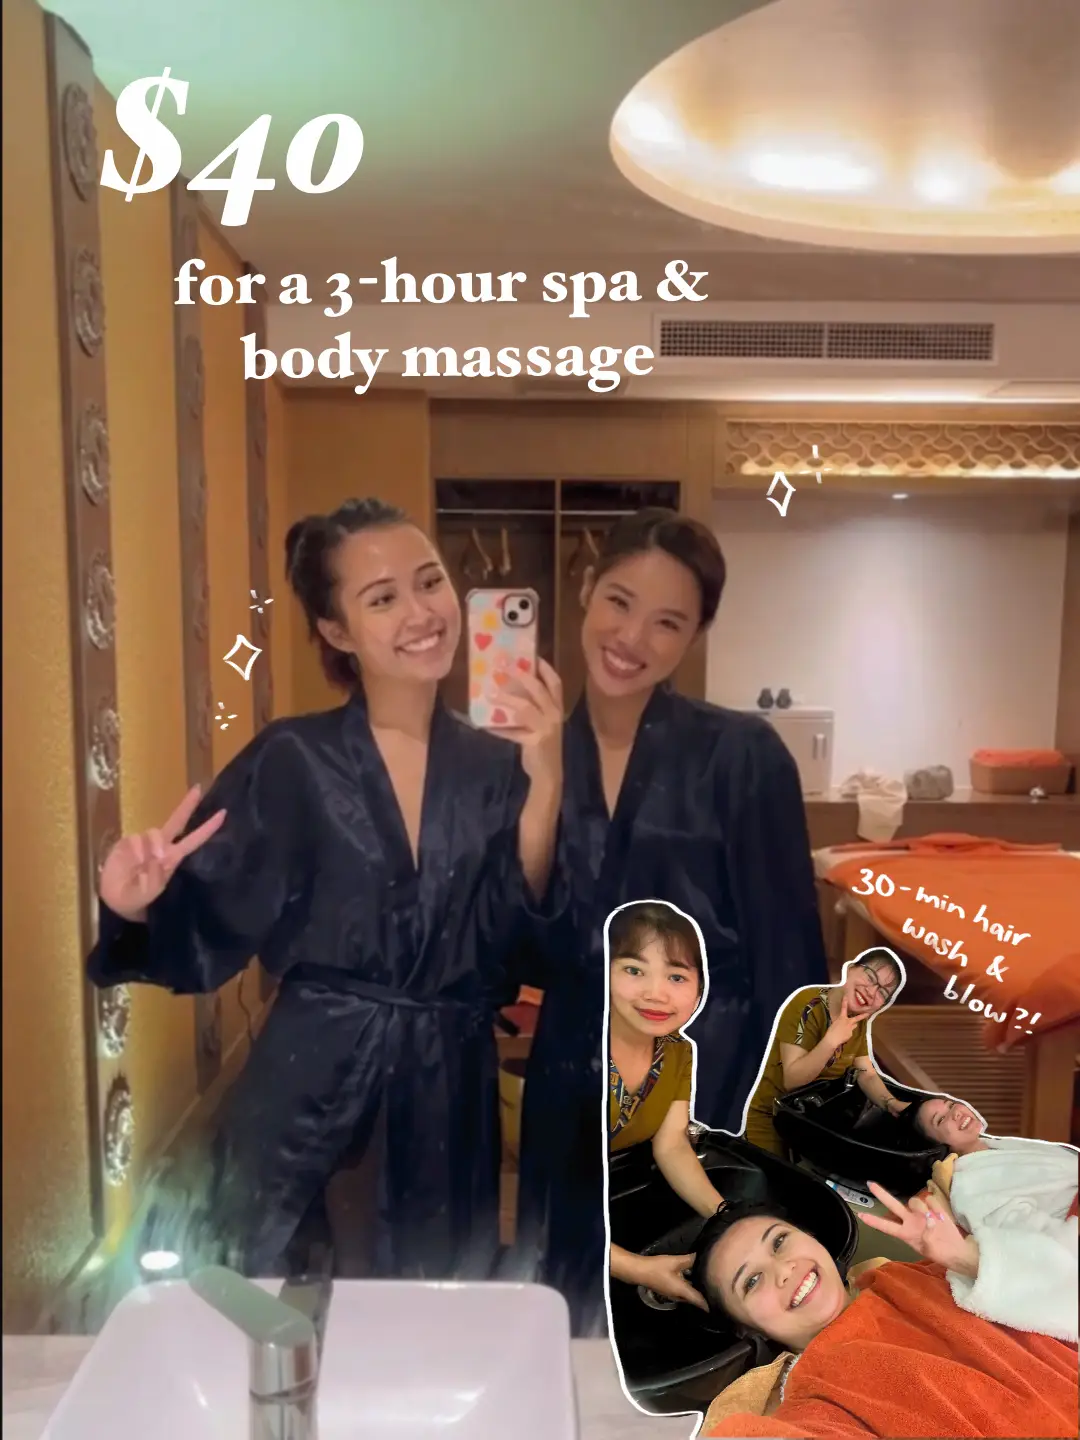 3-hour spa & body massage review 🧖🏻‍♀️💆🏻‍♀️ $40 only?!'s images(0)